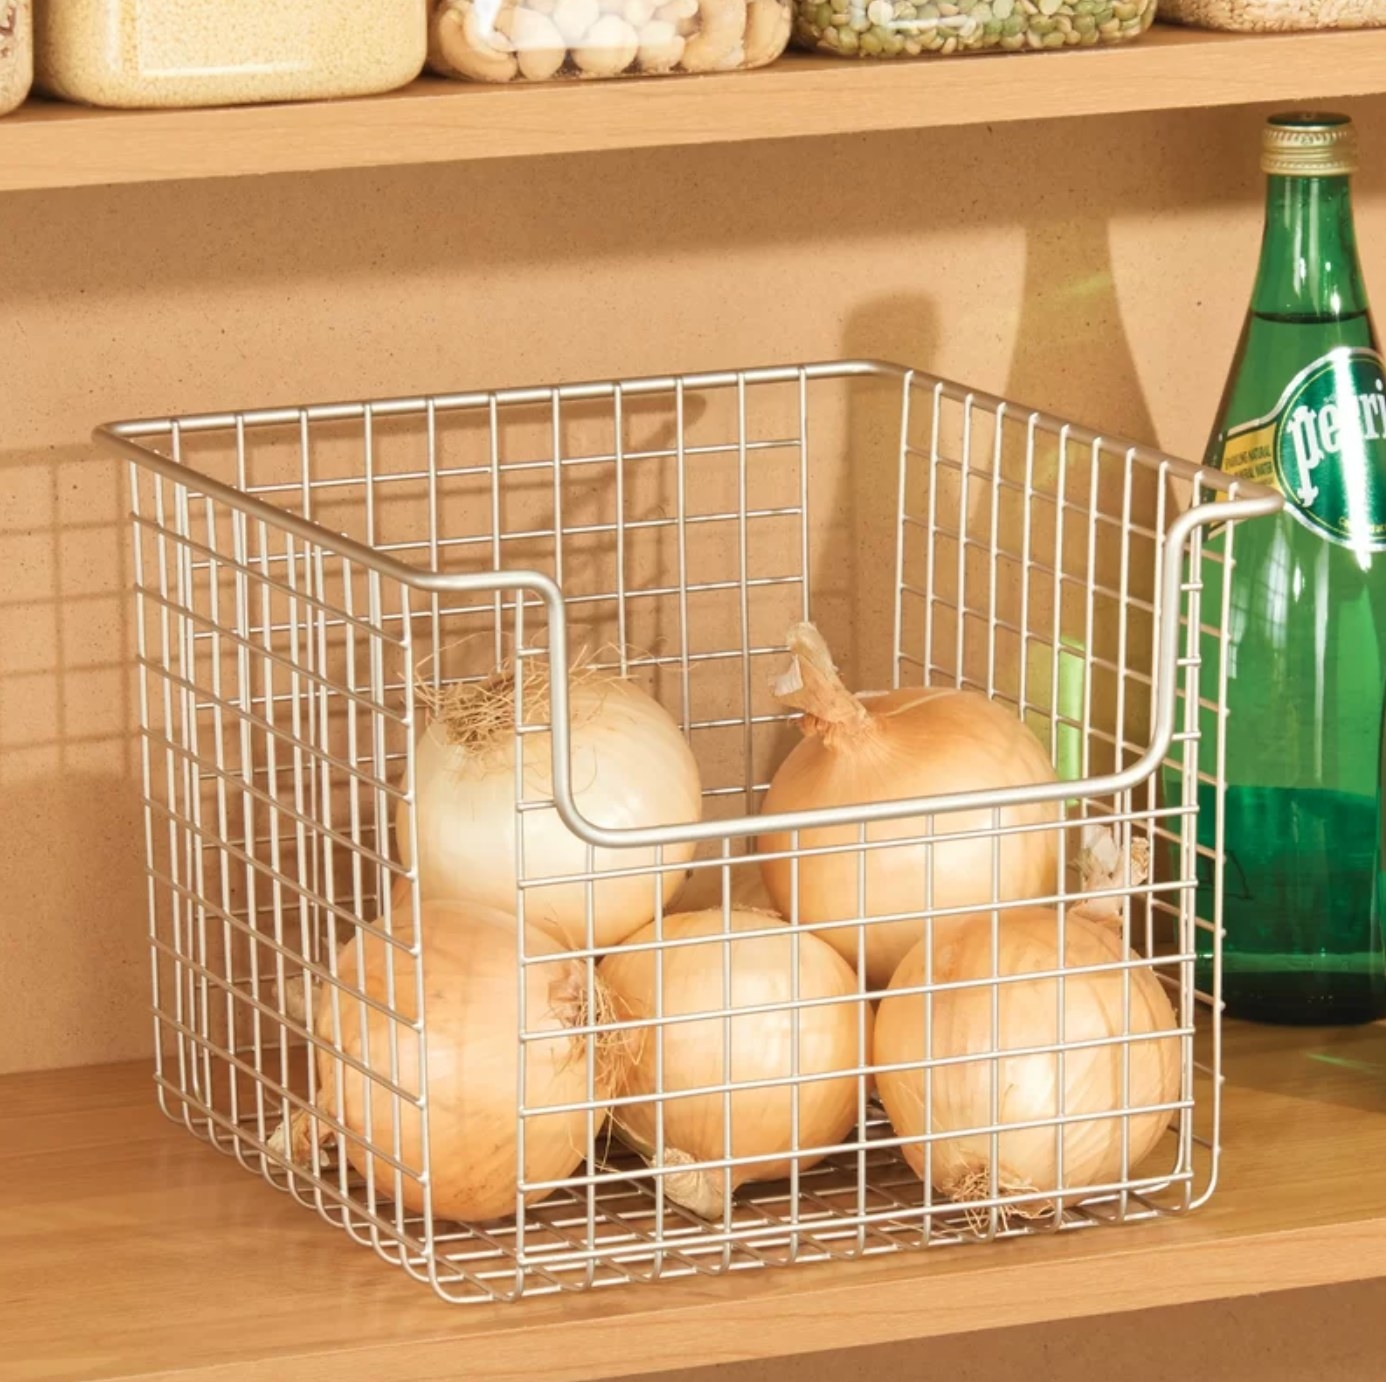 The wire basket holding onions